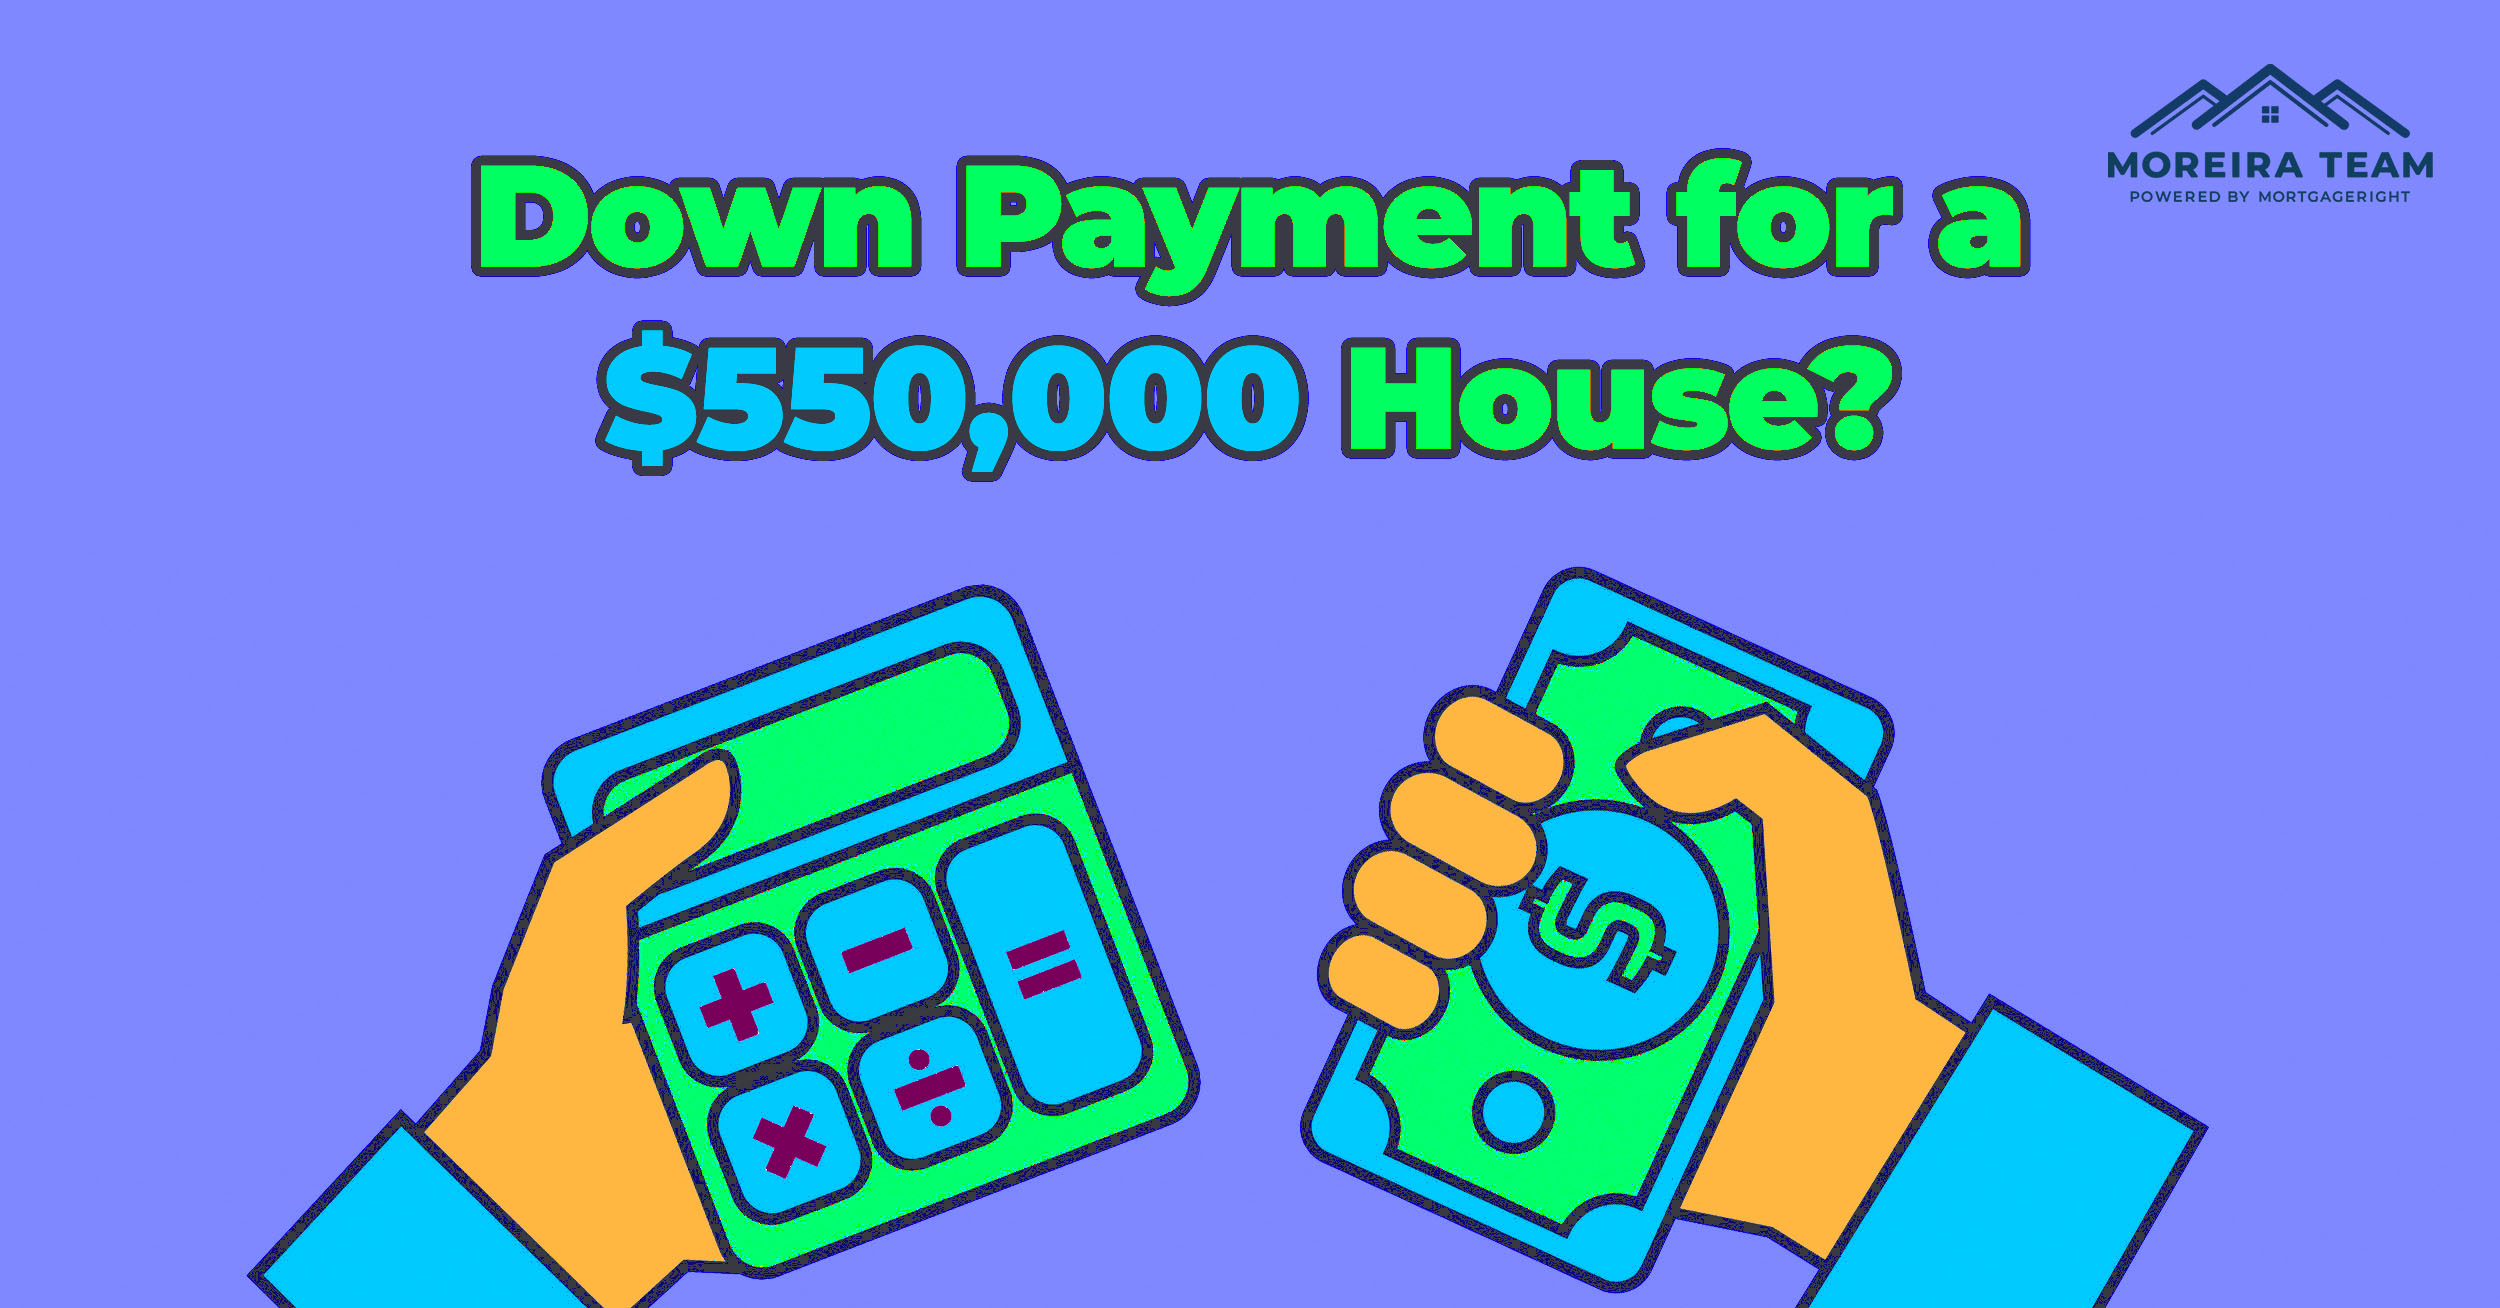 How Much is a Down Payment for a $550,000 Home?